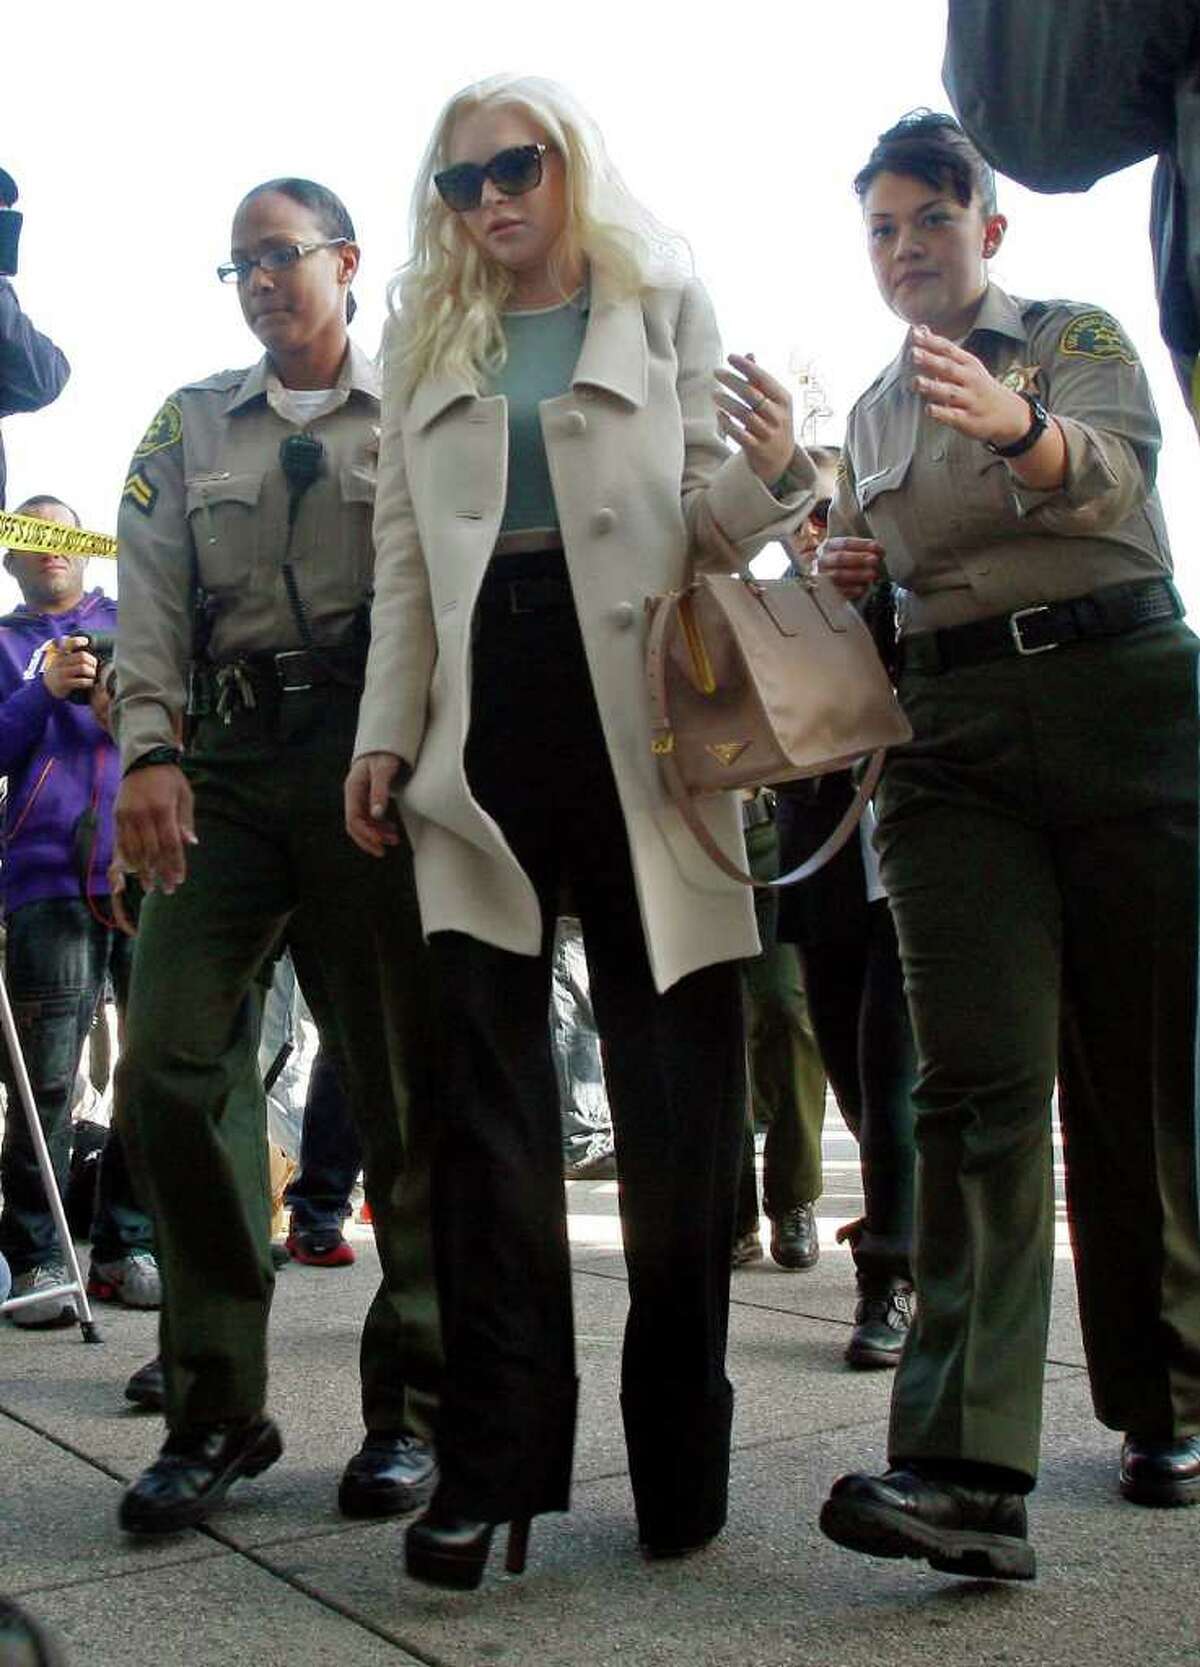 Lindsay Lohan arrives at Los Angeles Superior Court for a probation progress hearing Tuesday, Jan. 17, 2012. Lohan remains on probation for convictions in a 2007 drunken driving case and a grand theft case in 2011. (AP Photo/Reed Saxon)